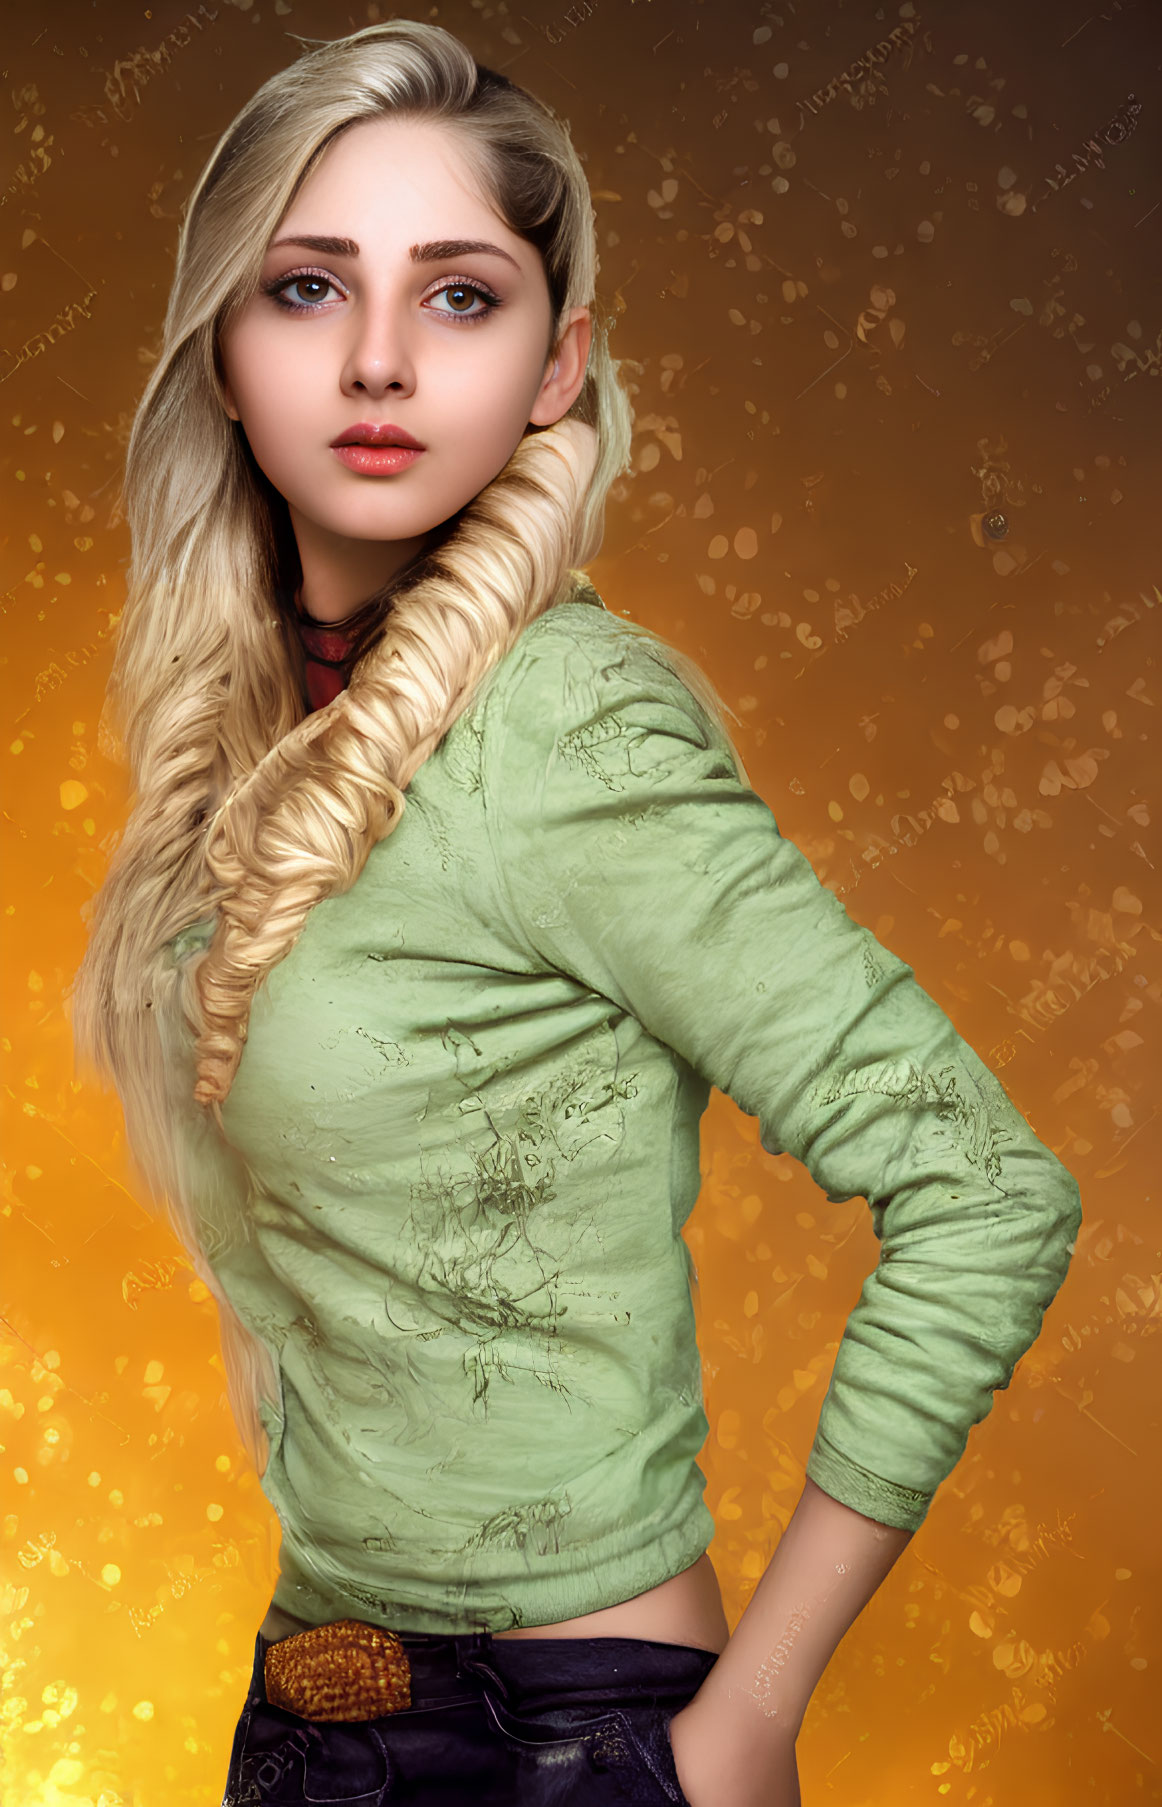 Blue-eyed woman with side braid in green top on warm yellow backdrop